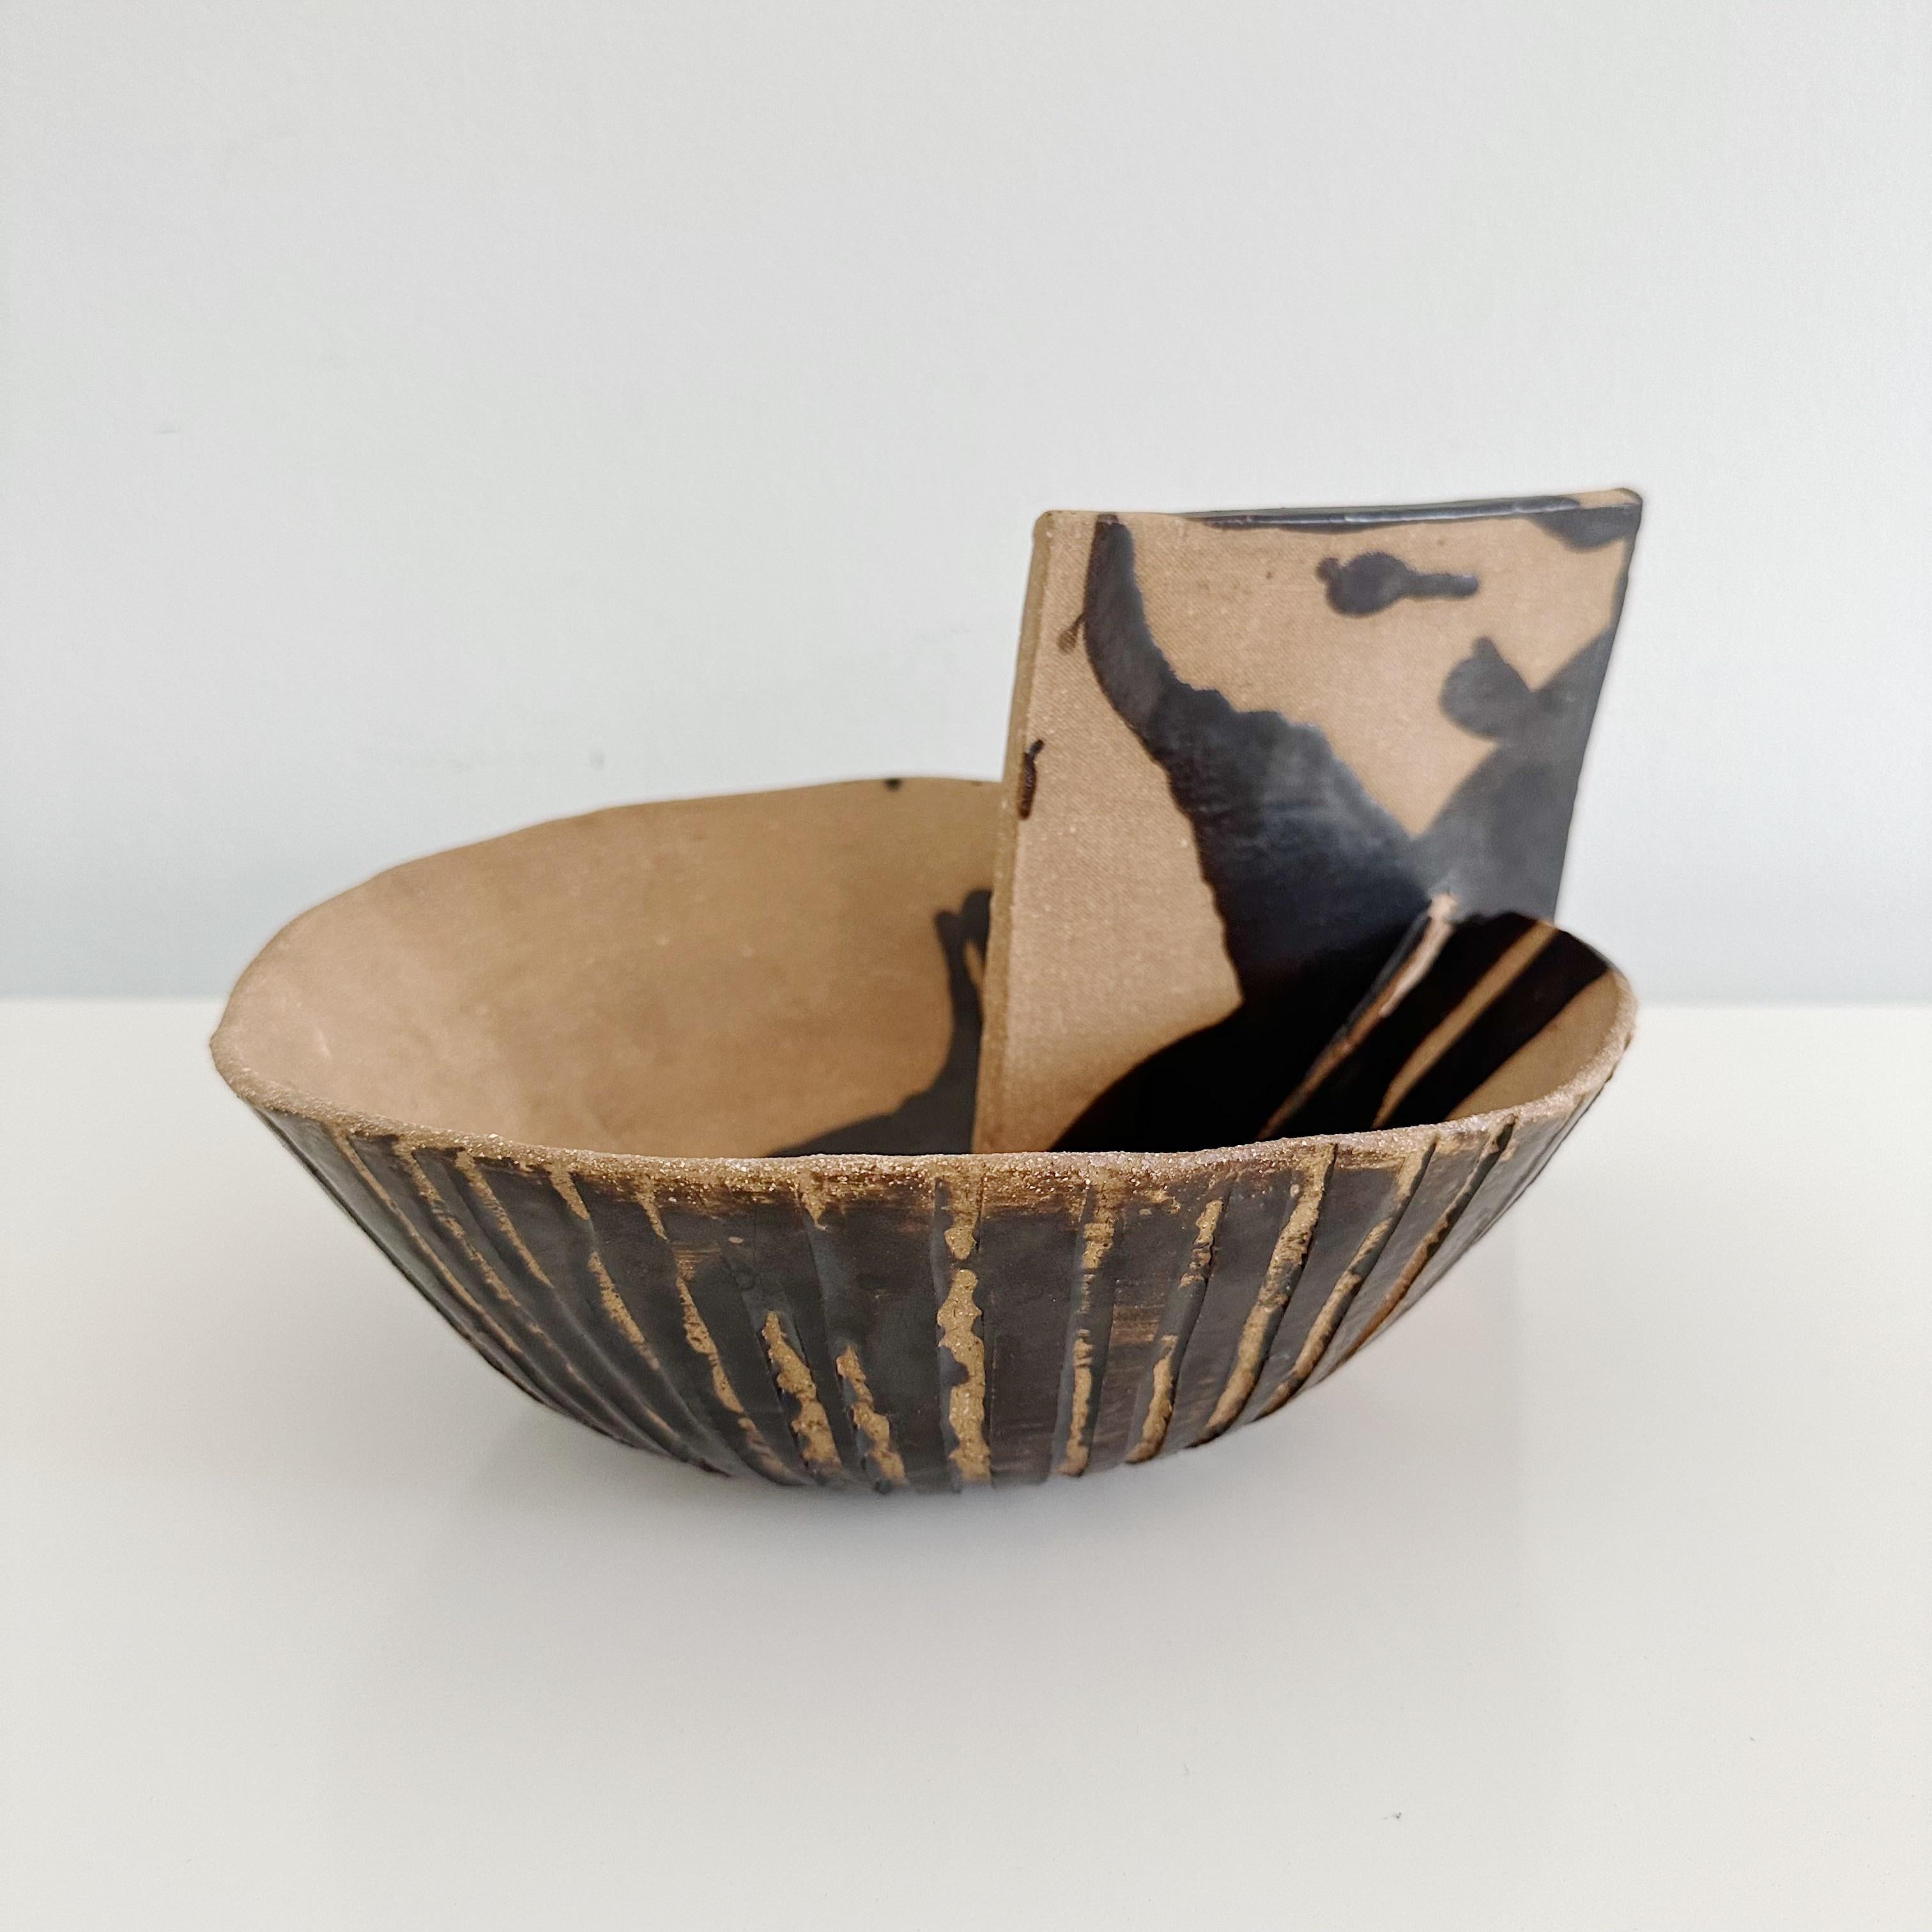 Unique vintage handmade studio pottery sculptural bowl with a distinctive two tone abstract bird-like design, featuring an inserted angular pottery piece on the side. The side piece shows signs of splitting from the firing process. Dark brown and